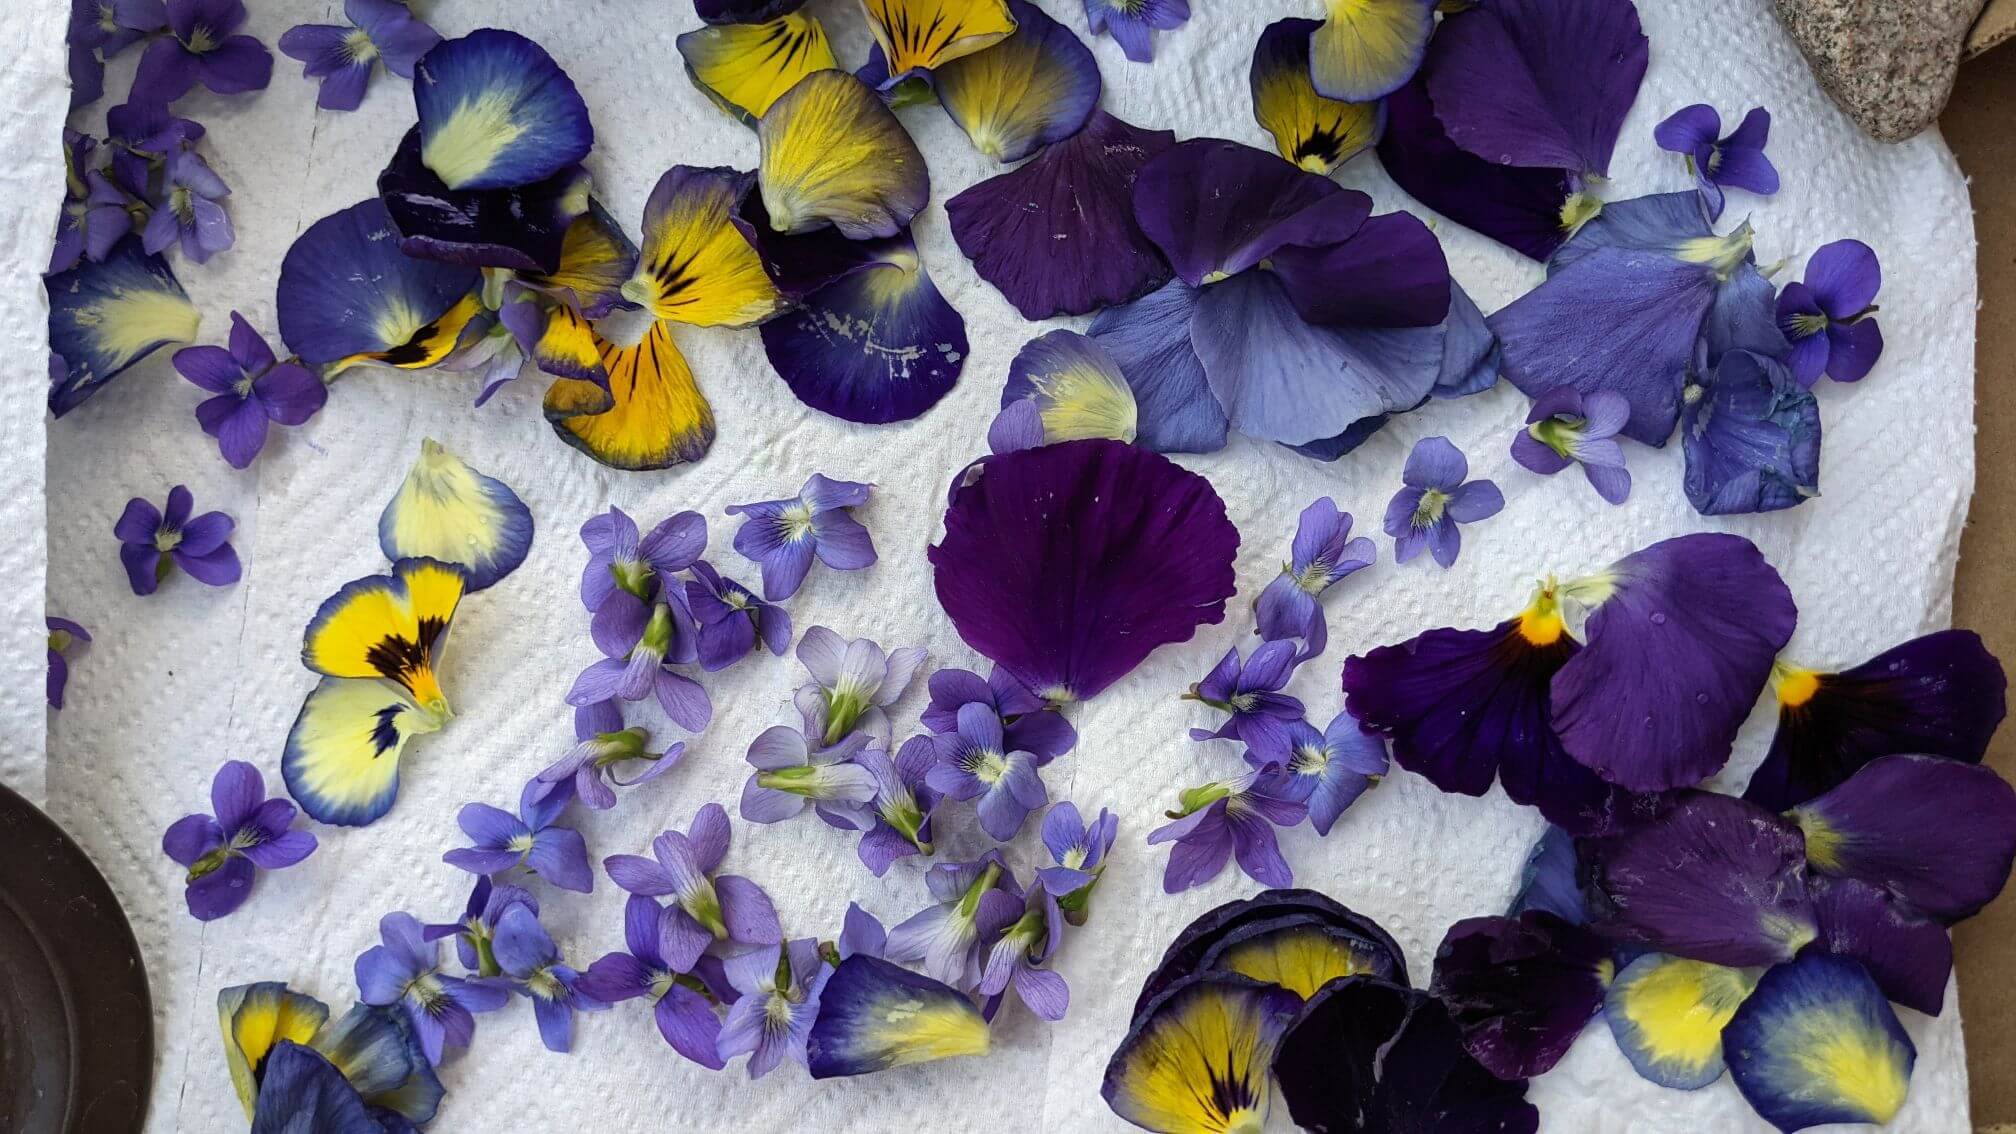 a variety of washed violet and pansy flowers are scattered on a paper towel to dry.